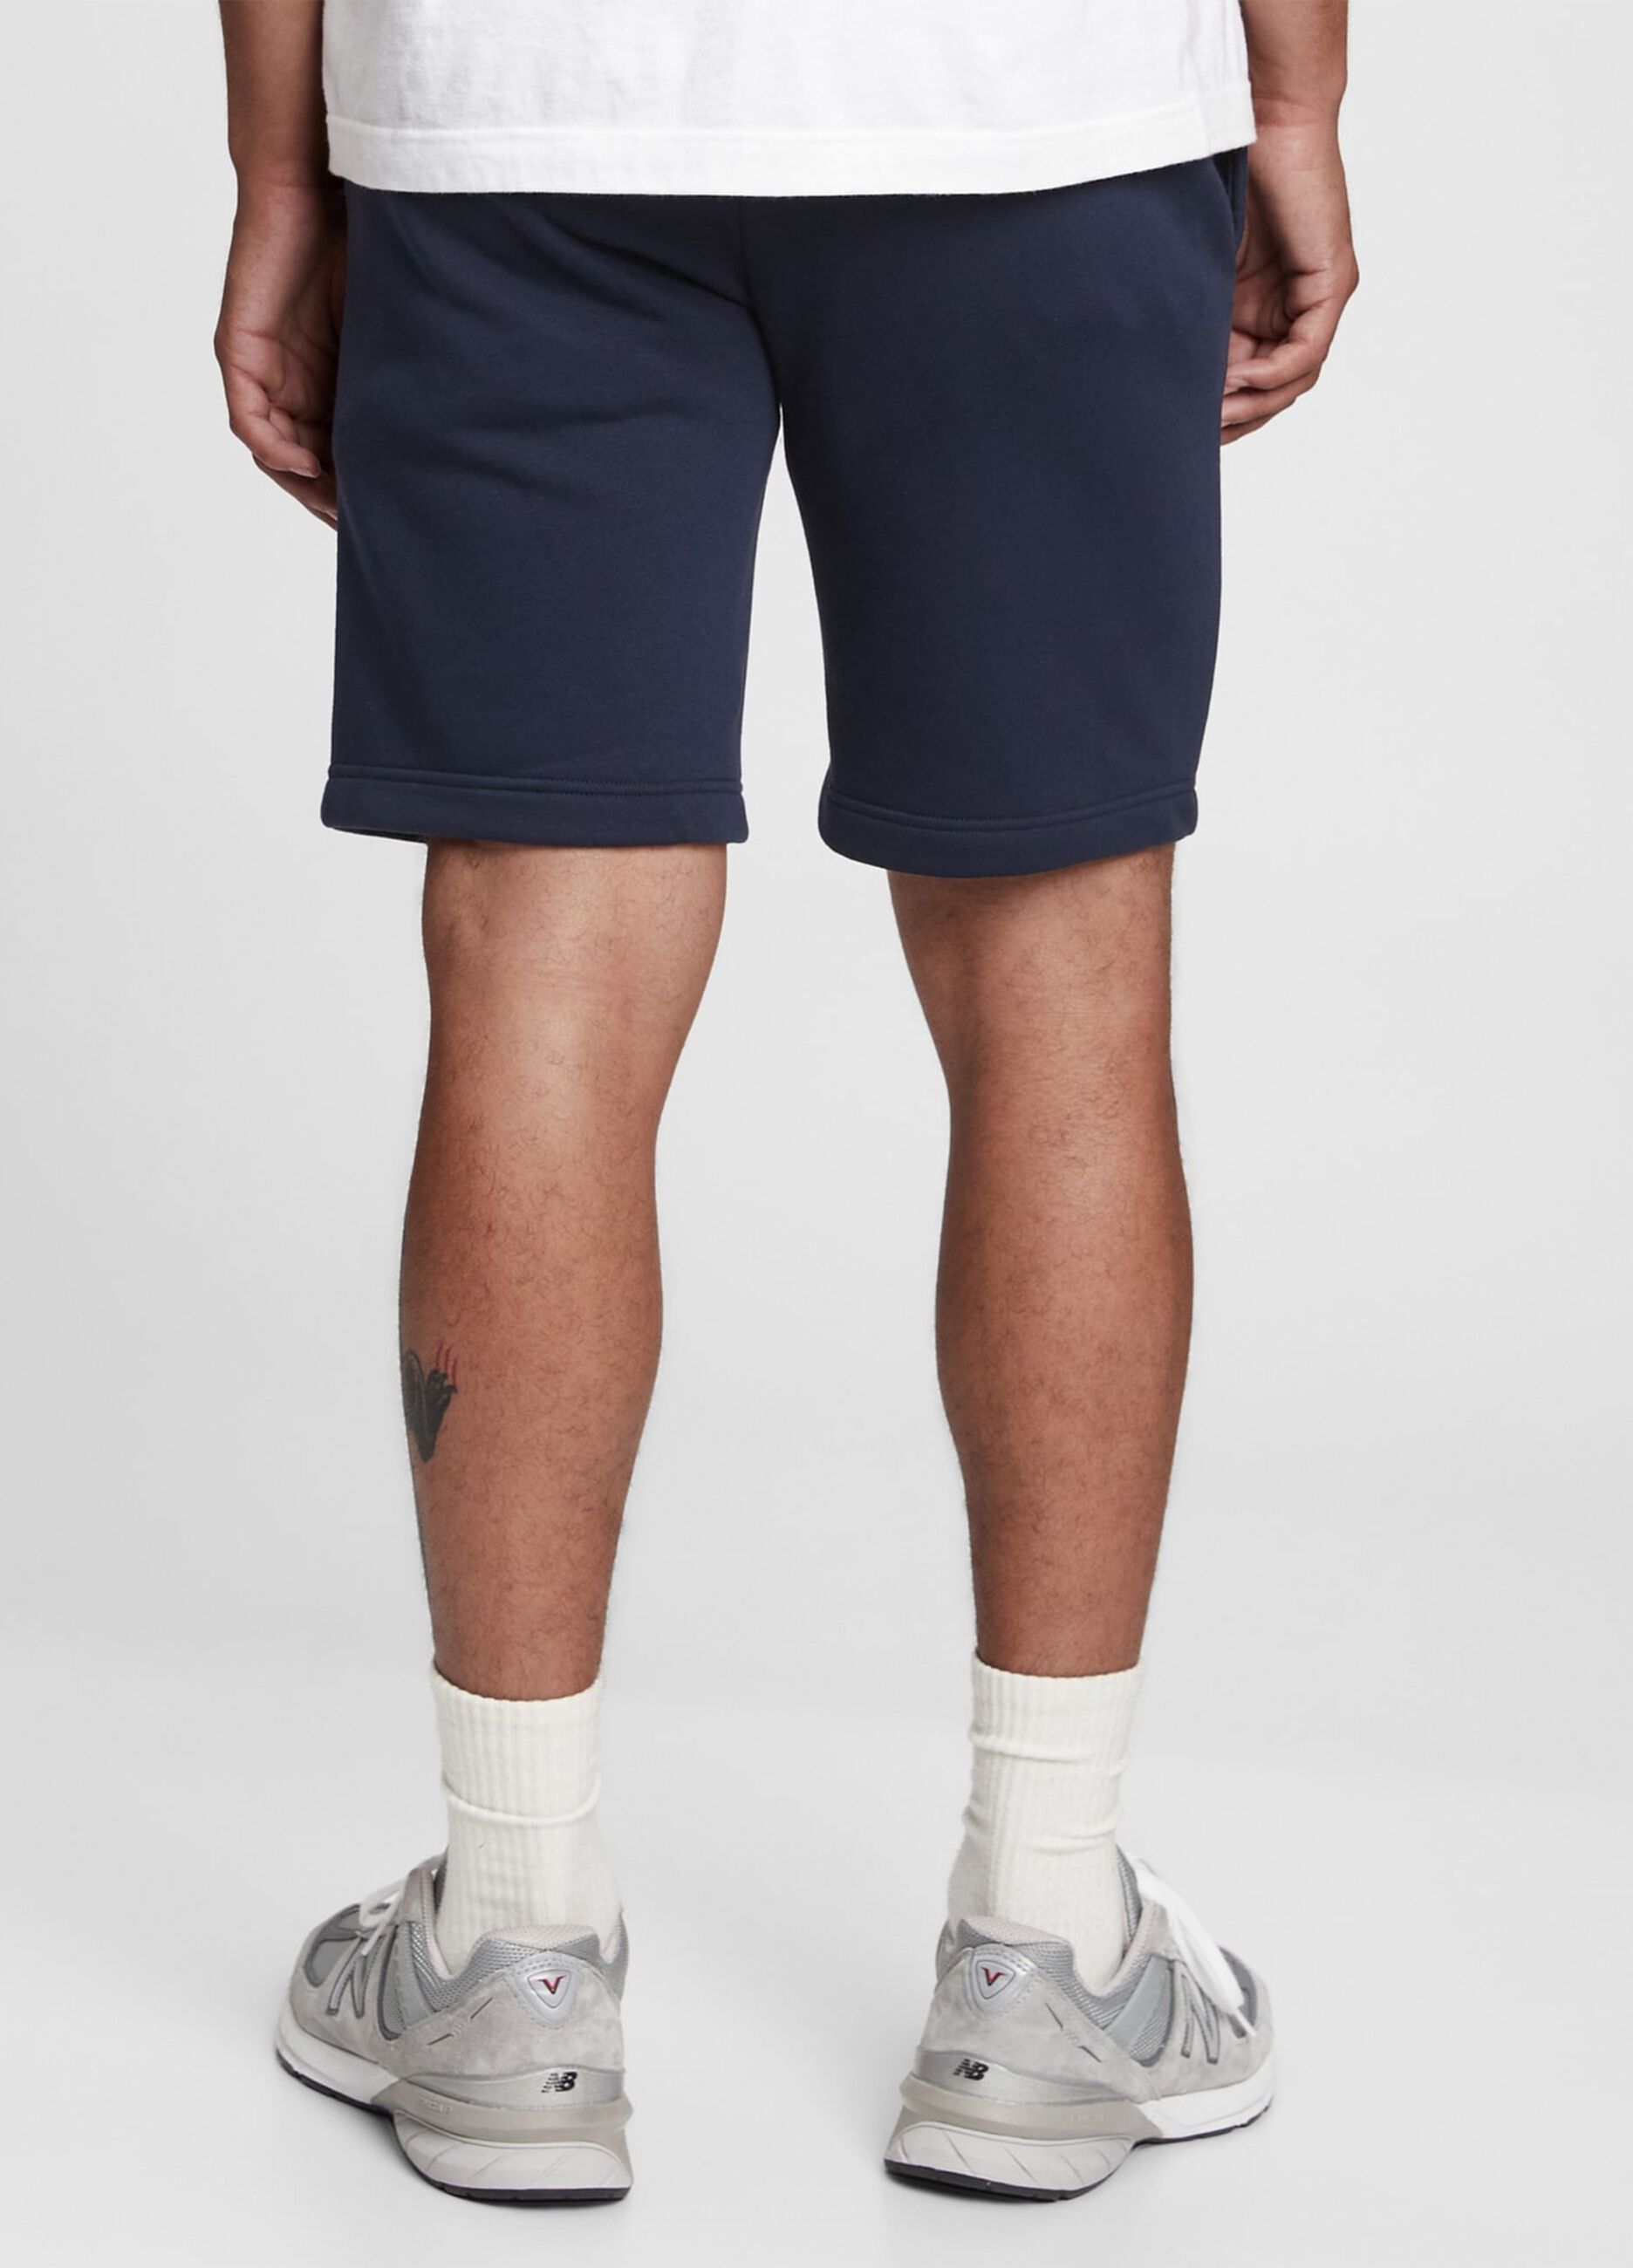 Plush Bermuda shorts with embroidered logo